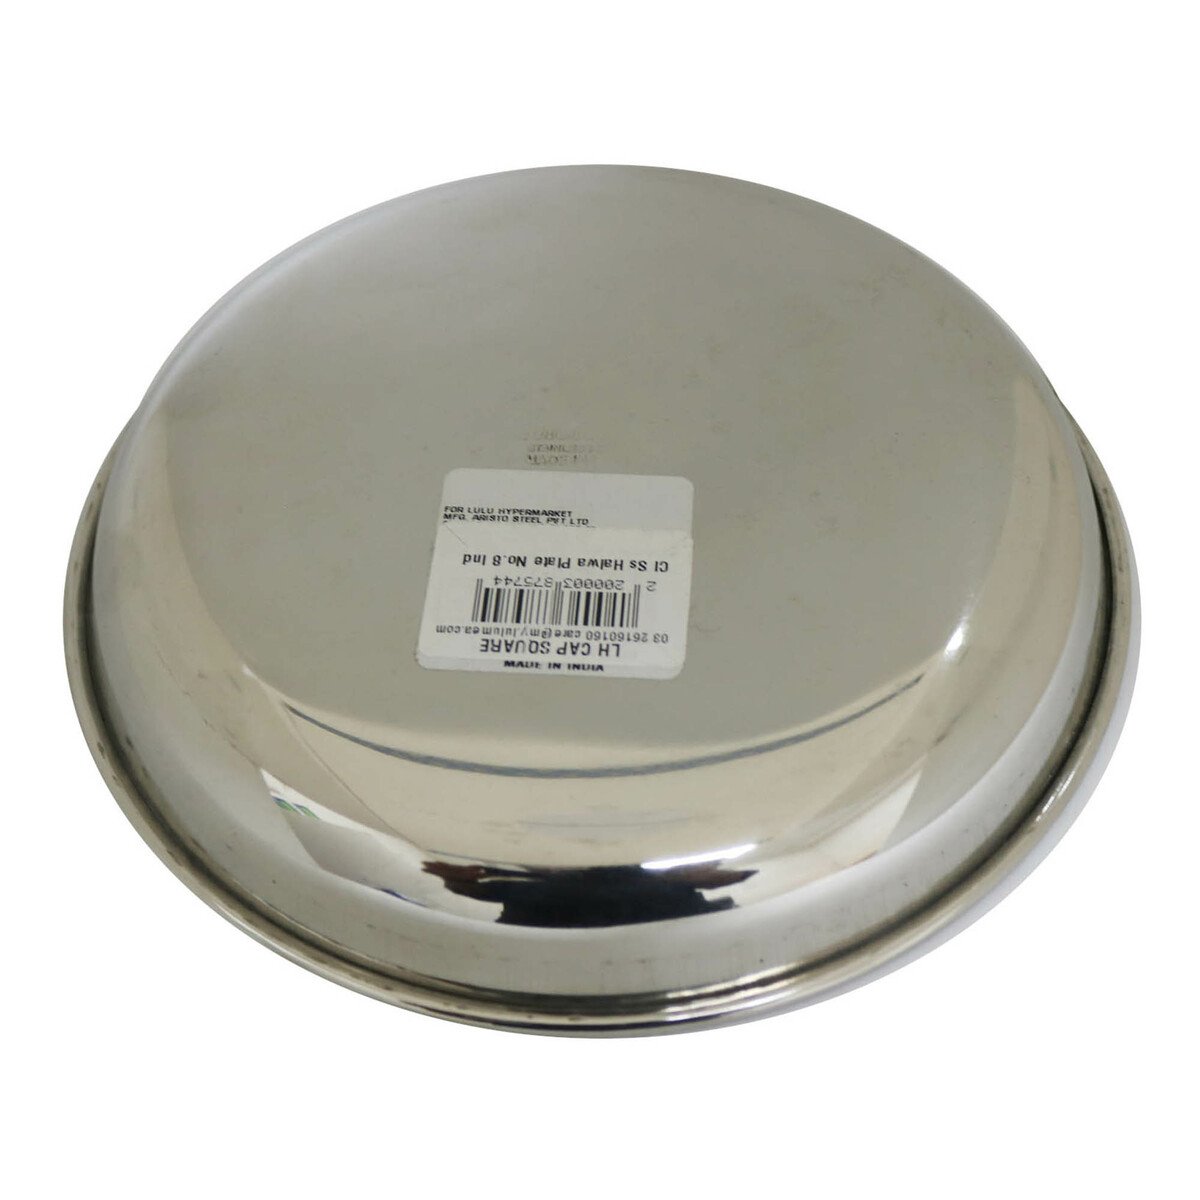 Chefline Stainless Steel Halwa Plate No.8 Ind